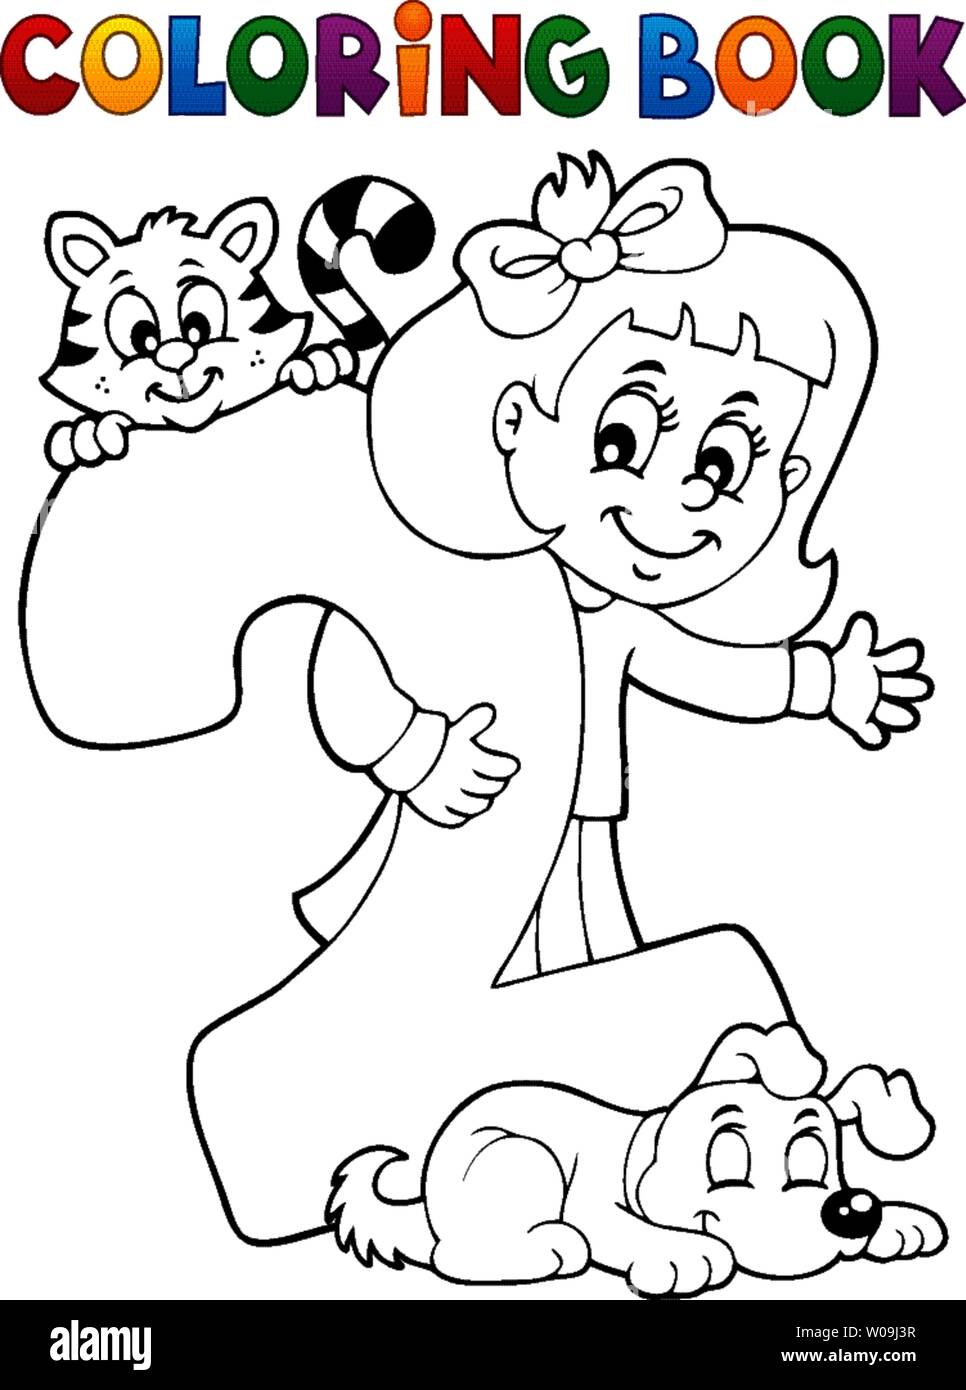 Coloring book girl with number two - eps10 vector illustration Stock ...